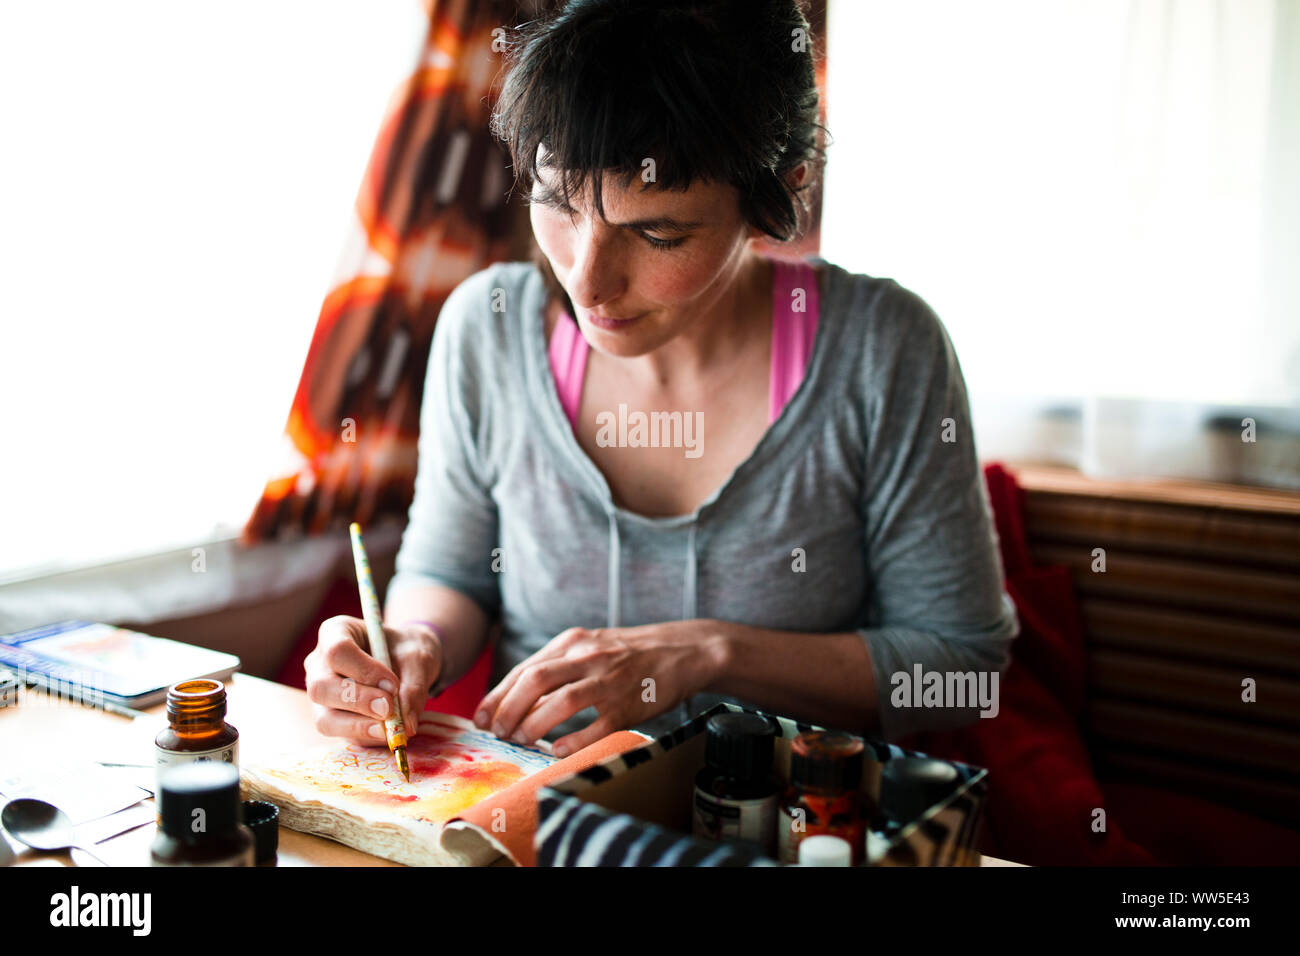 30-40 years old woman sitting in the caravan painting on paper with watercolour Stock Photo